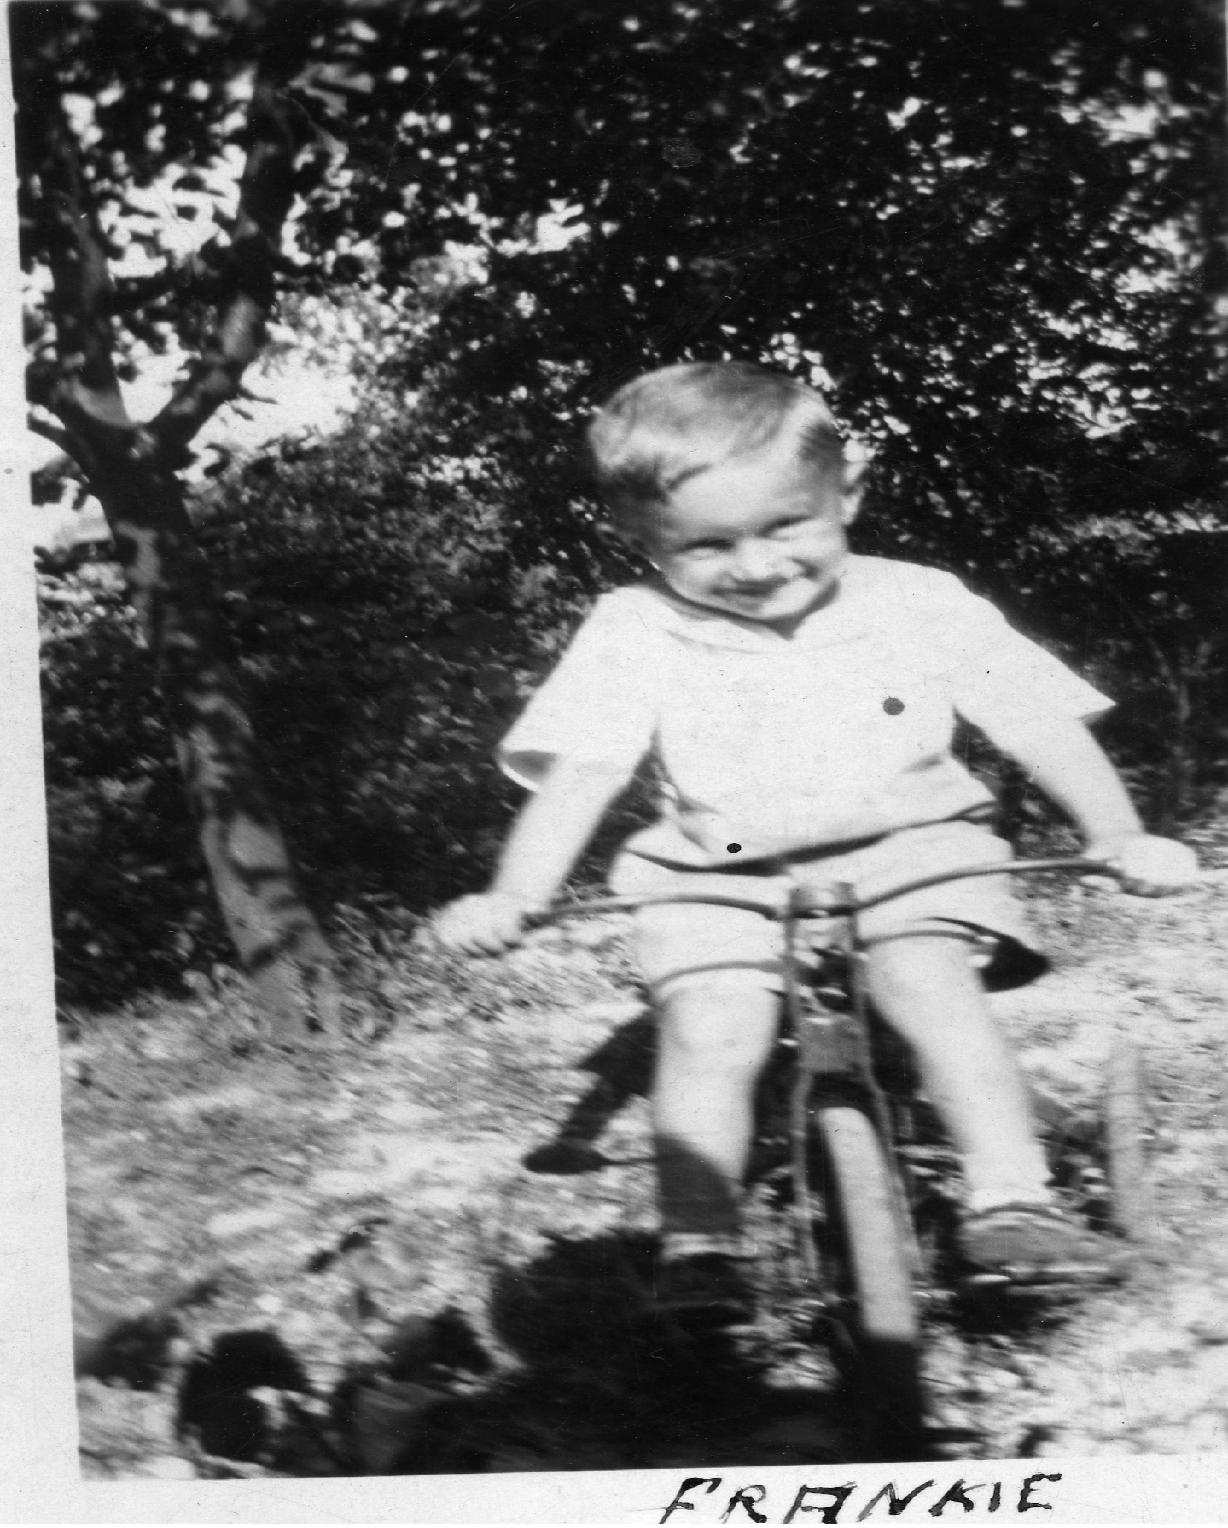 Frank riding a tricycle